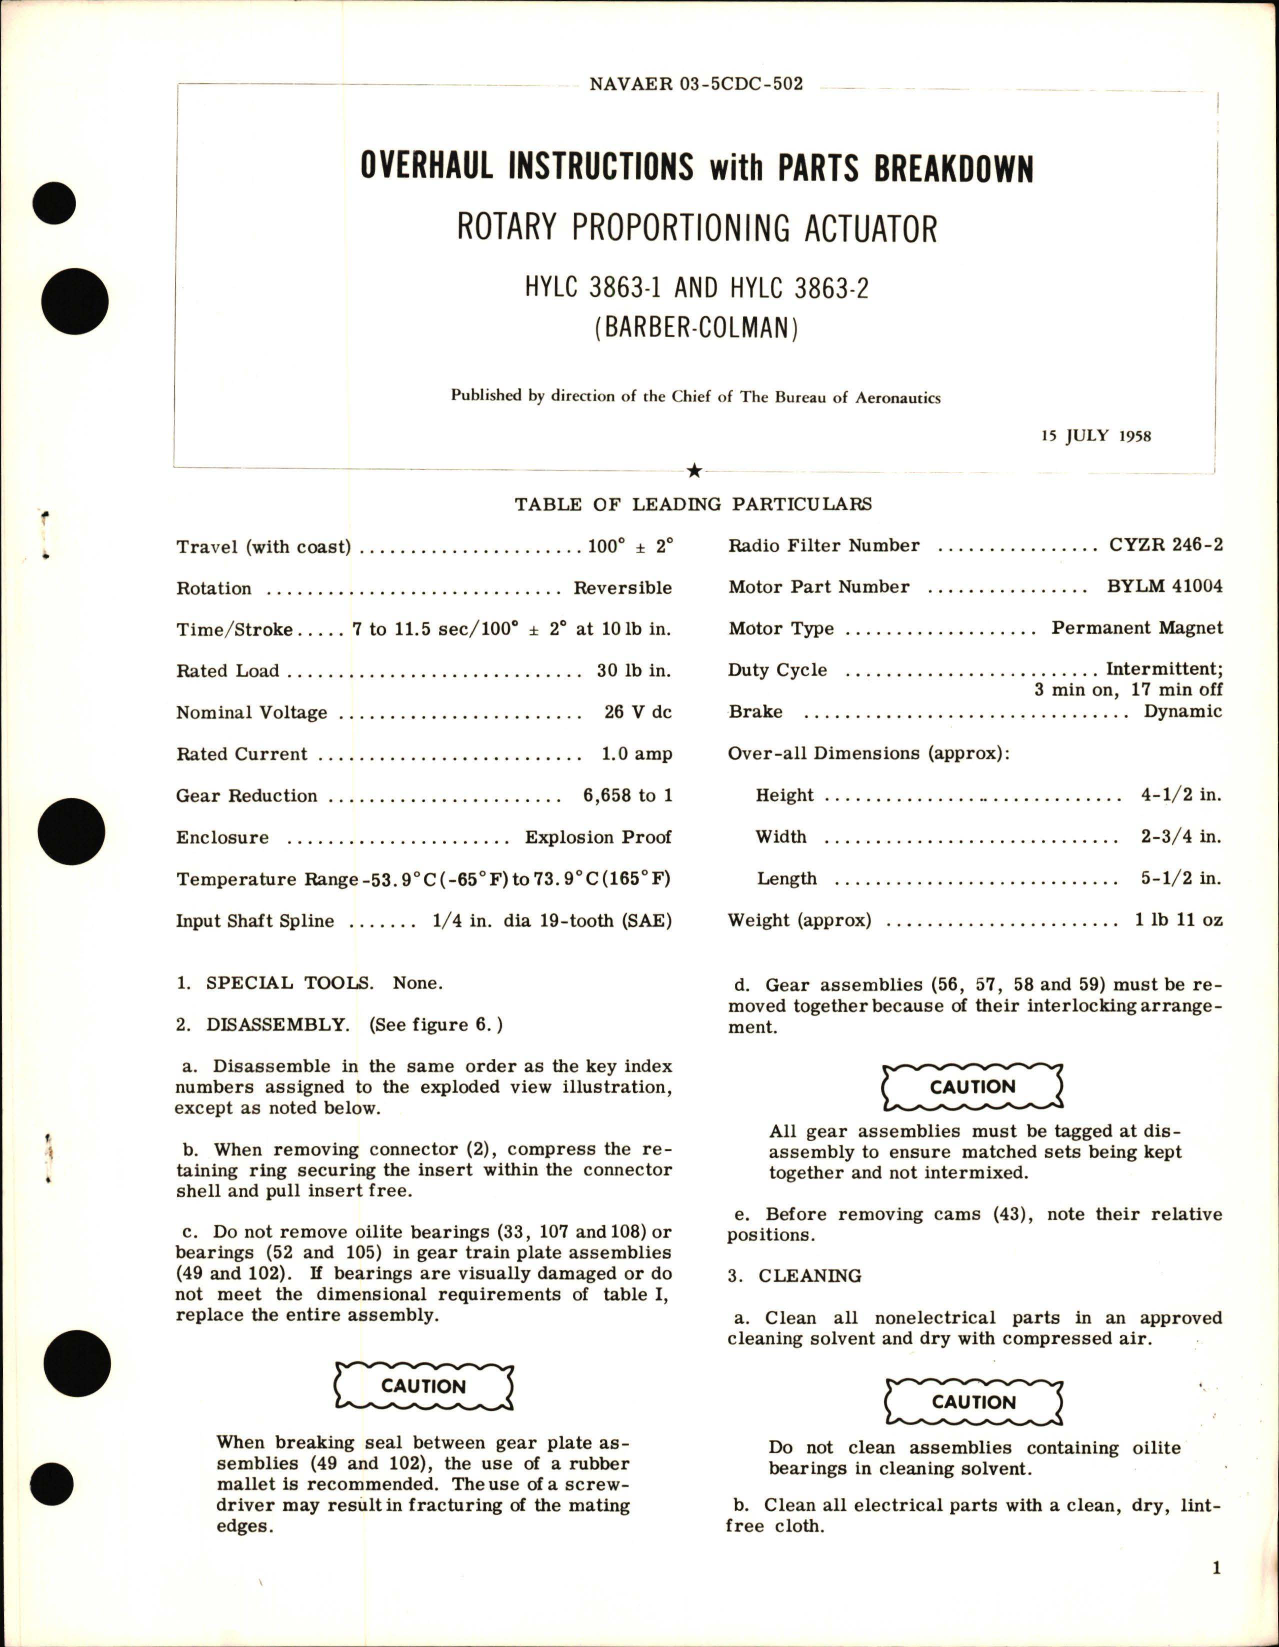 Sample page 1 from AirCorps Library document: Overhaul Instructions with Parts Breakdown for Rotary Proportioning Actuator - HYLC 3863-1 and HYLC 3863-2 